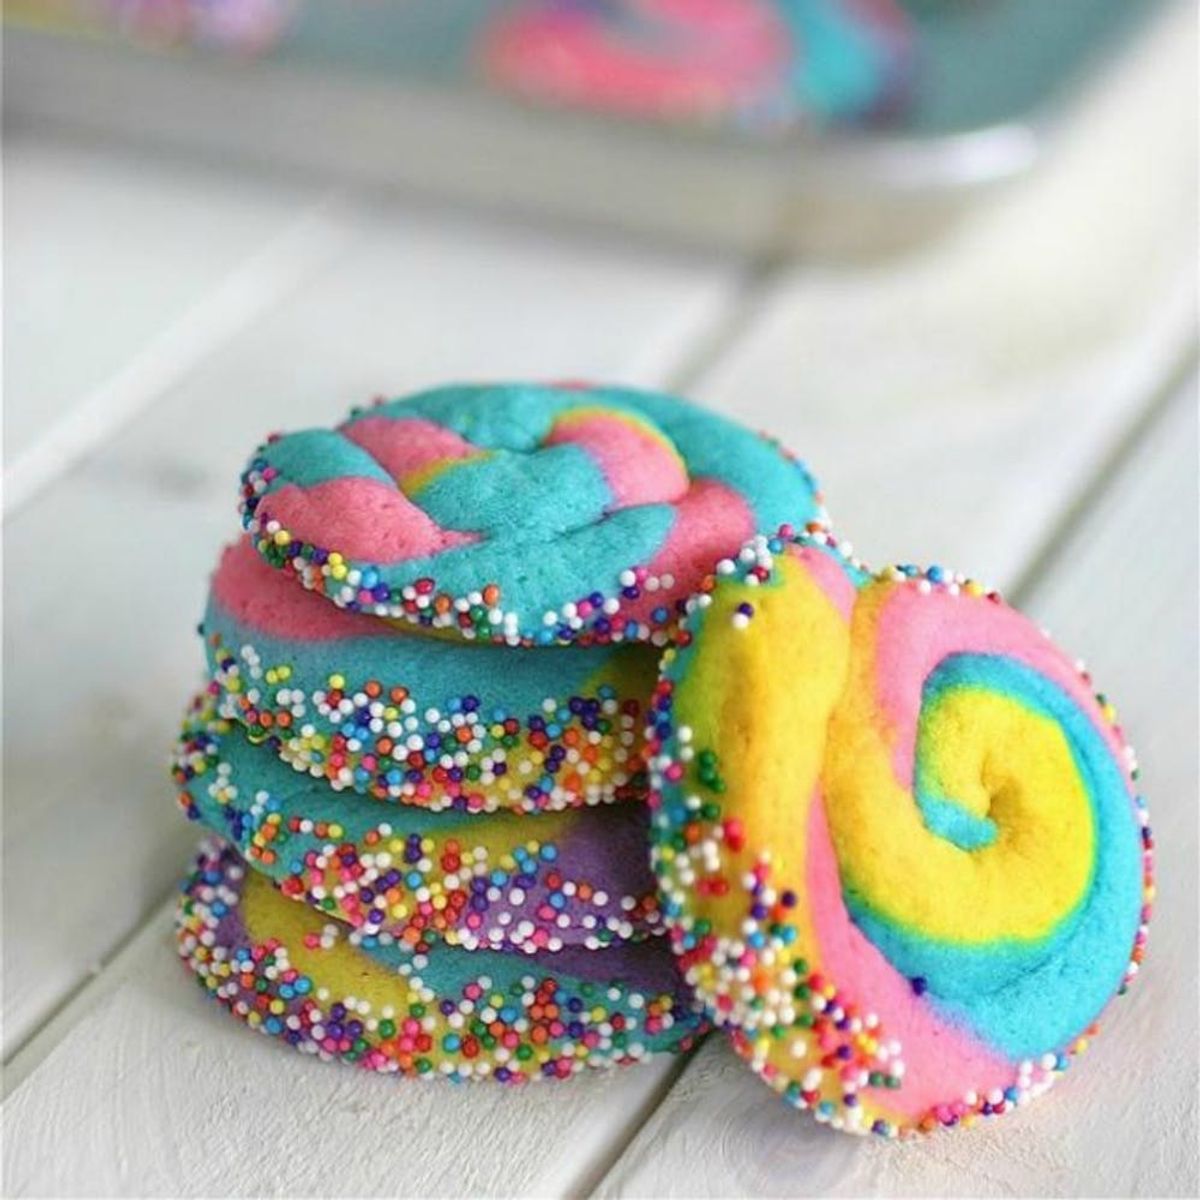 12 Outrageous Rainbow Food Recipes to Feed Your Color-Spectrum Cravings